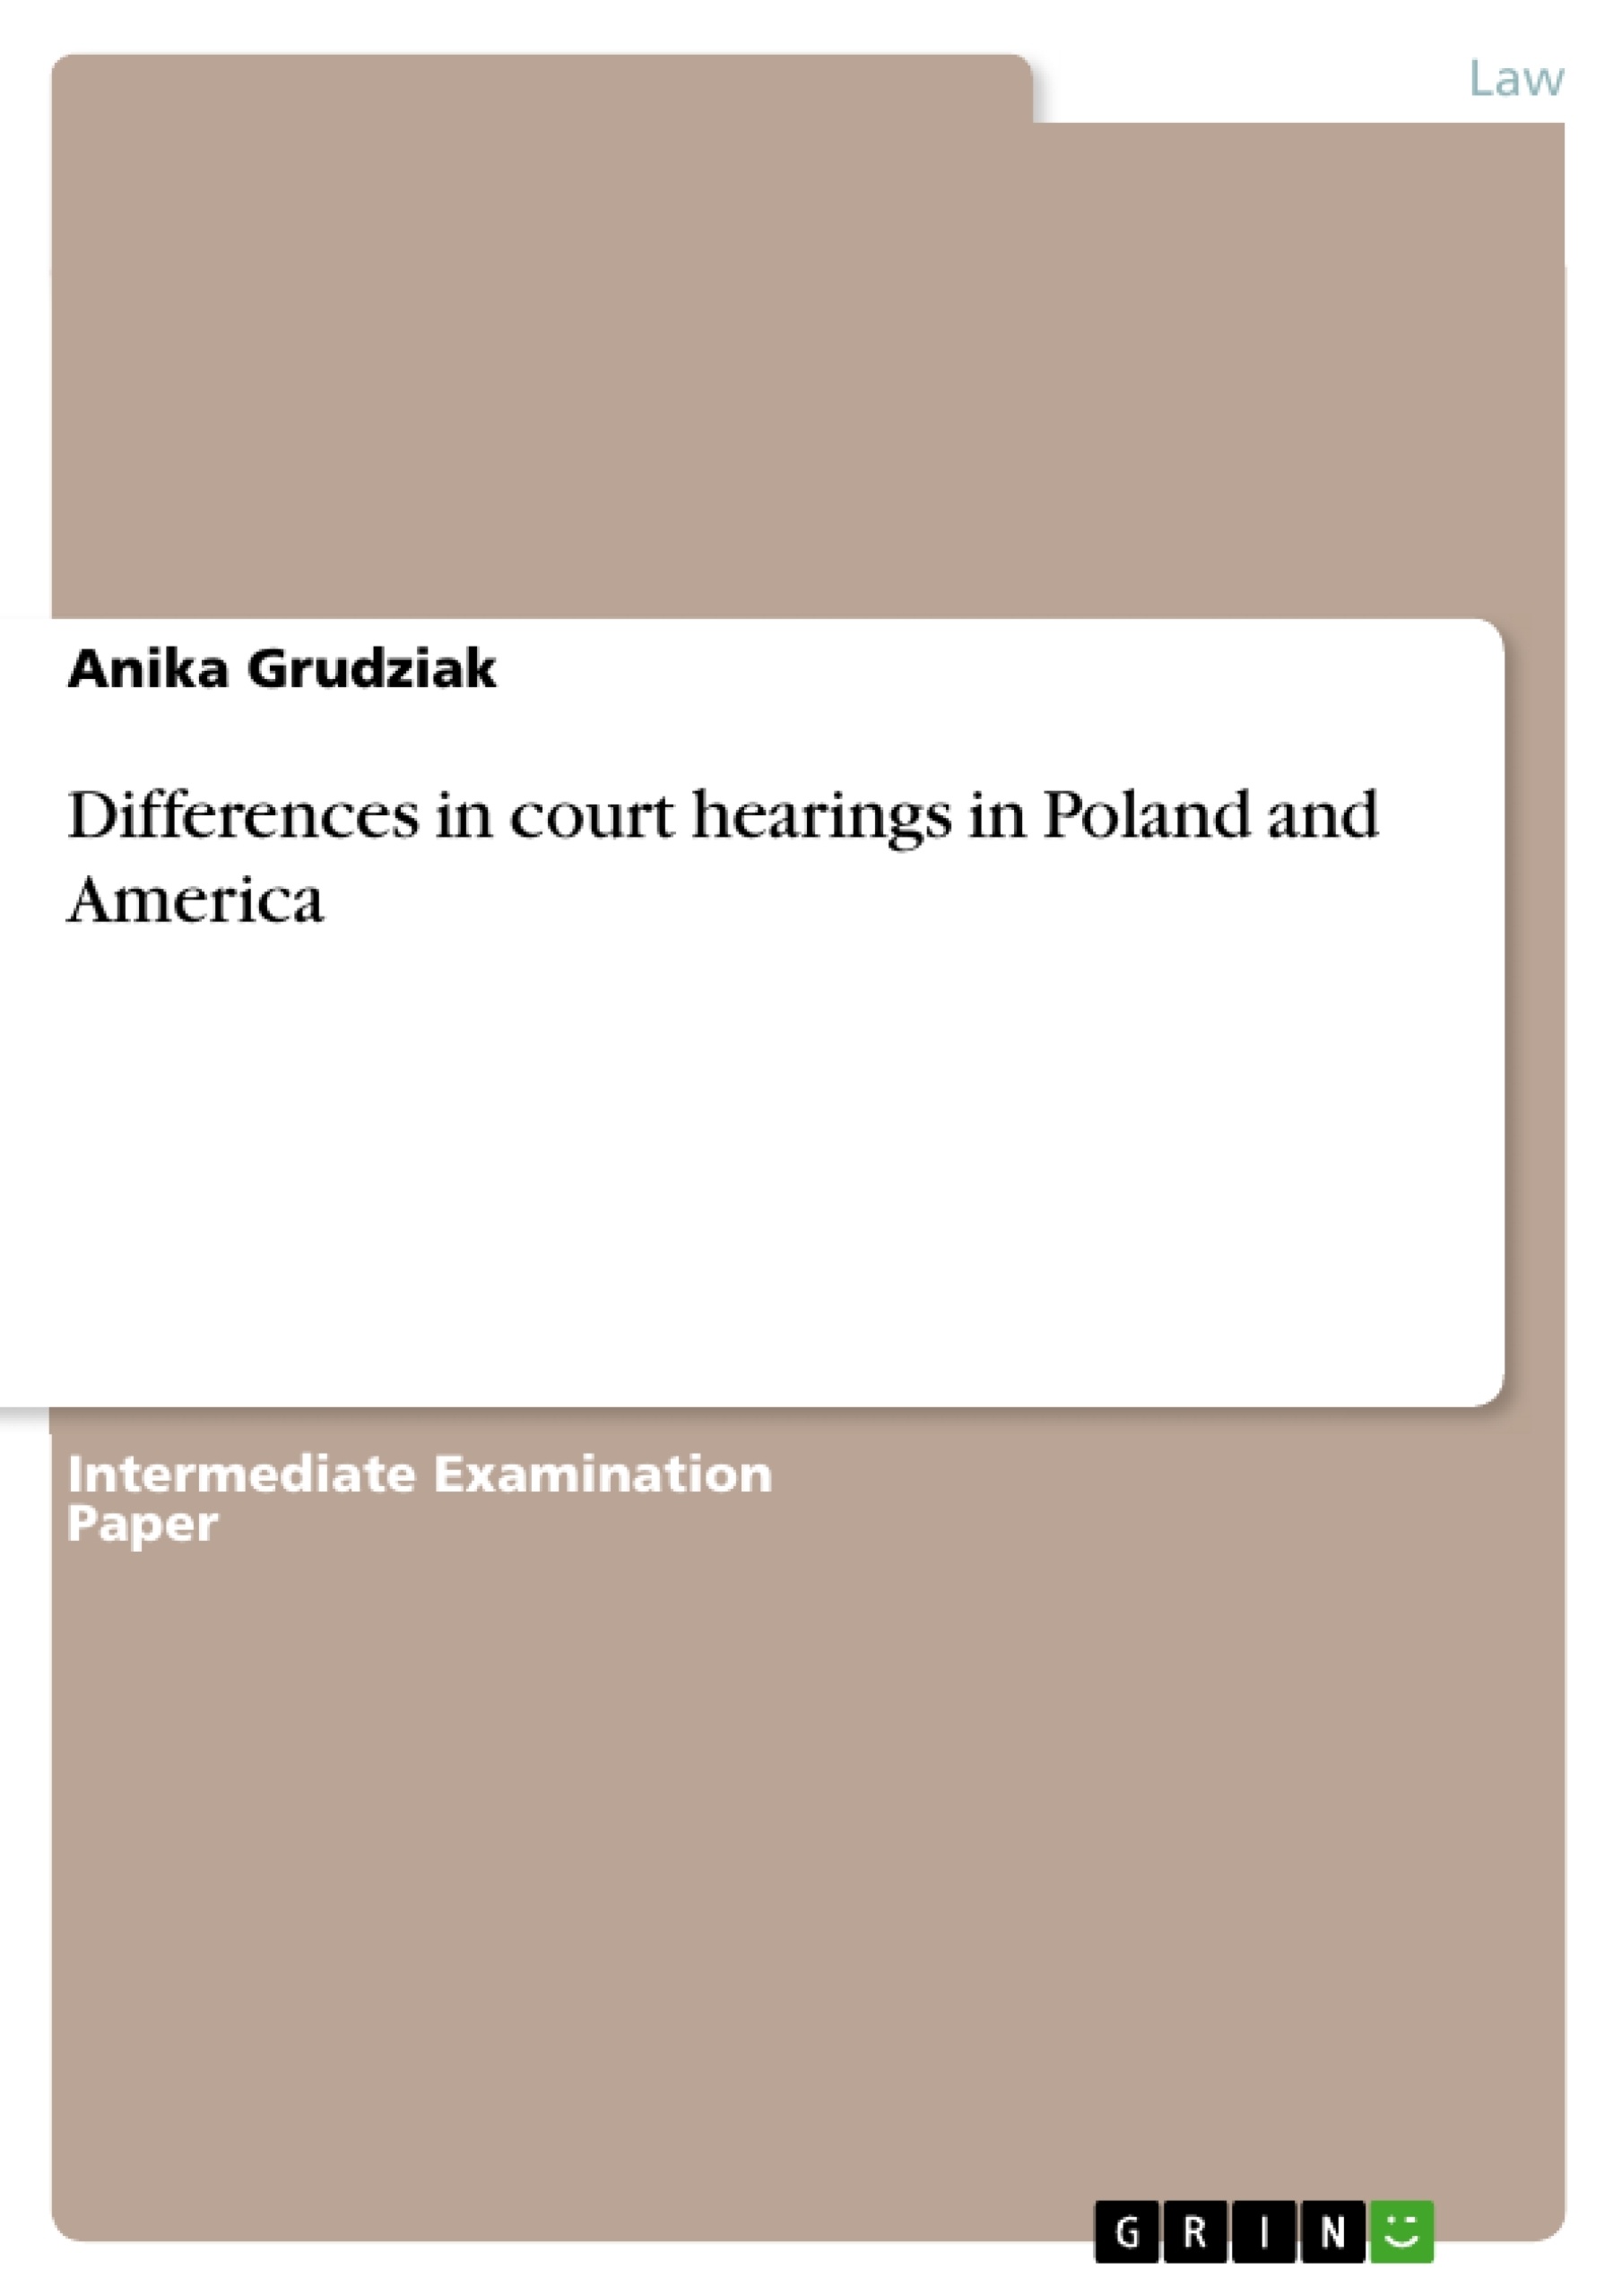 Title: Differences in court hearings in Poland and America